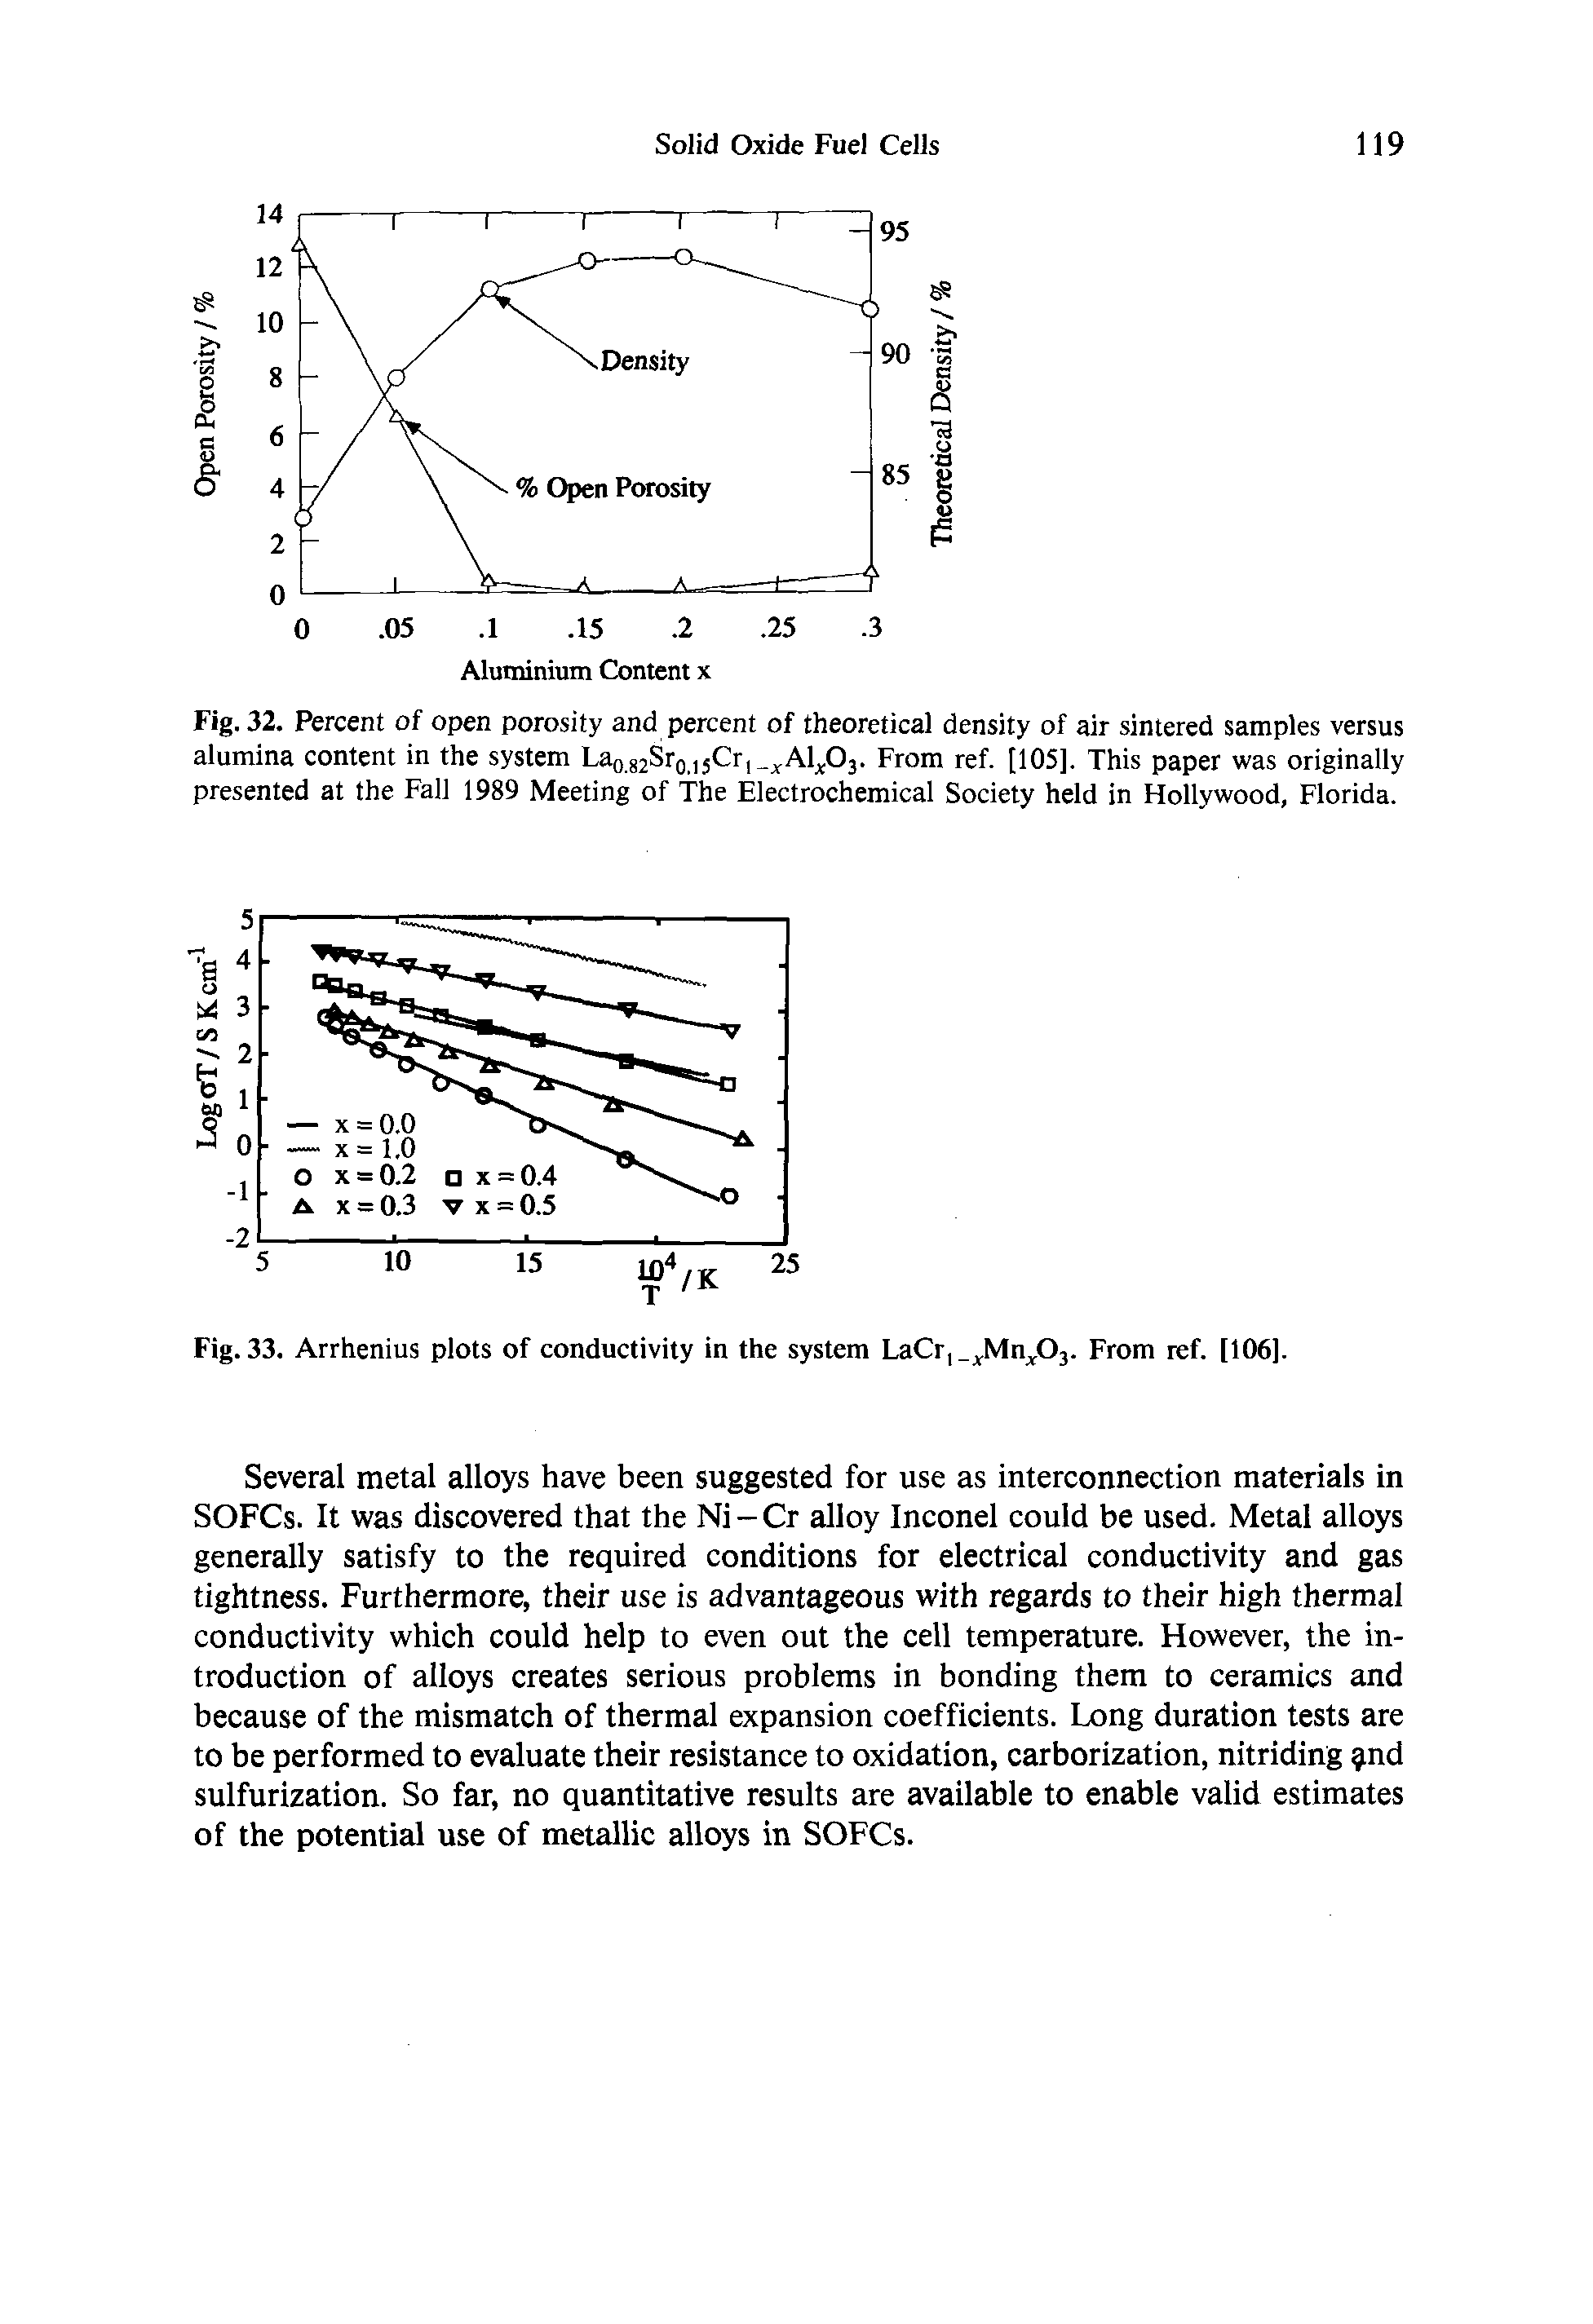 Fig. 32. Percent of open porosity and percent of theoretical density of air sintered samples versus alumina content in the system La0.g2Sr0jjCrj Al.. From ref. [105], This paper was originally presented at the Fall 1989 Meeting of The Electrochemical Society held in Hollywood, Florida.